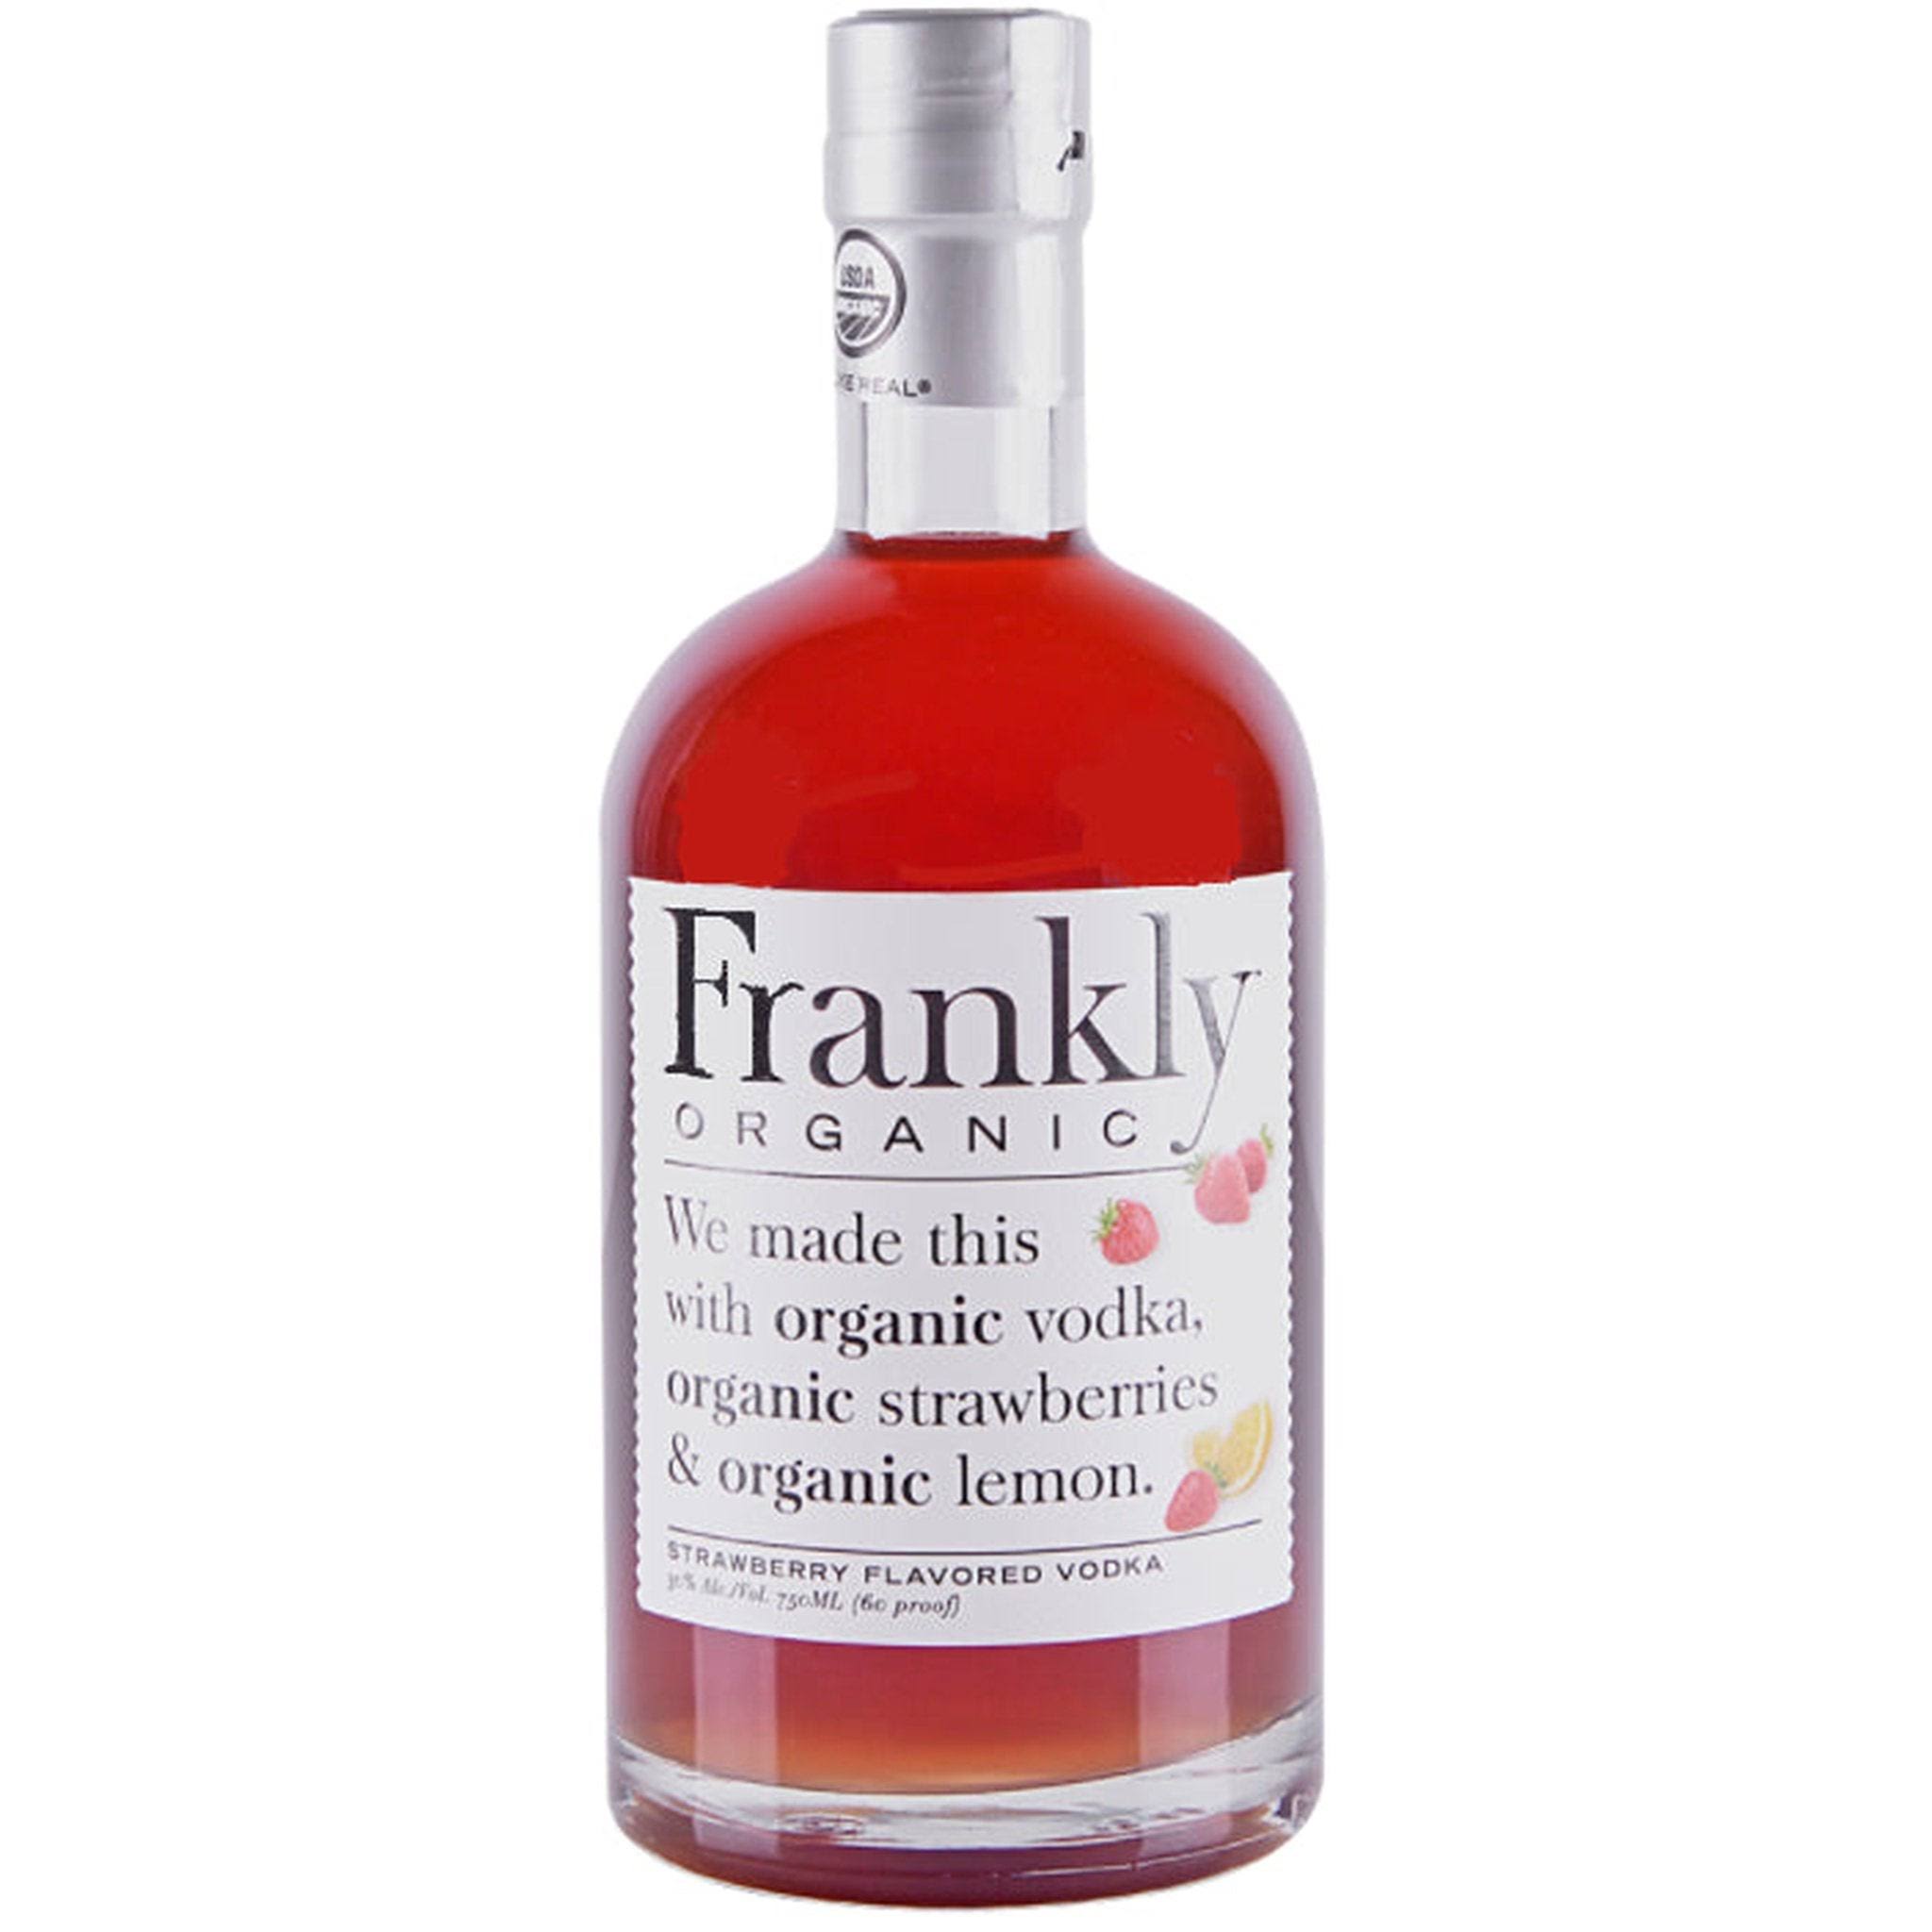 Frankly Vodka, Organic, Strawberry Flavored - 750 ml